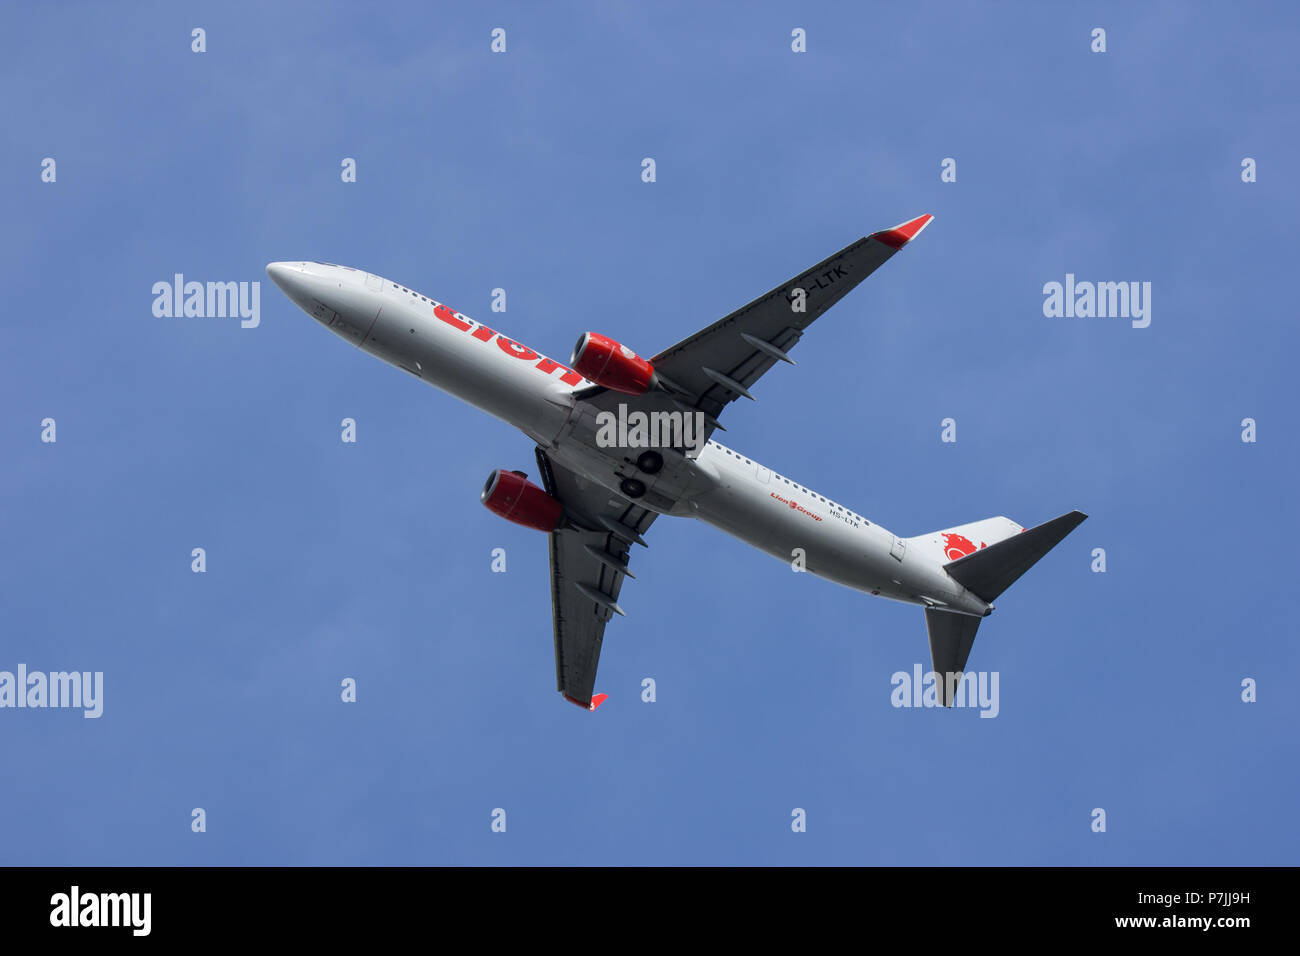 CHIANG MAI, THAILAND - JUNE 28 2018: HS-LTK Boeing 737-900 of Thai lion Air airline. Take off from Chiangmai airport to Bangkok. Stock Photo